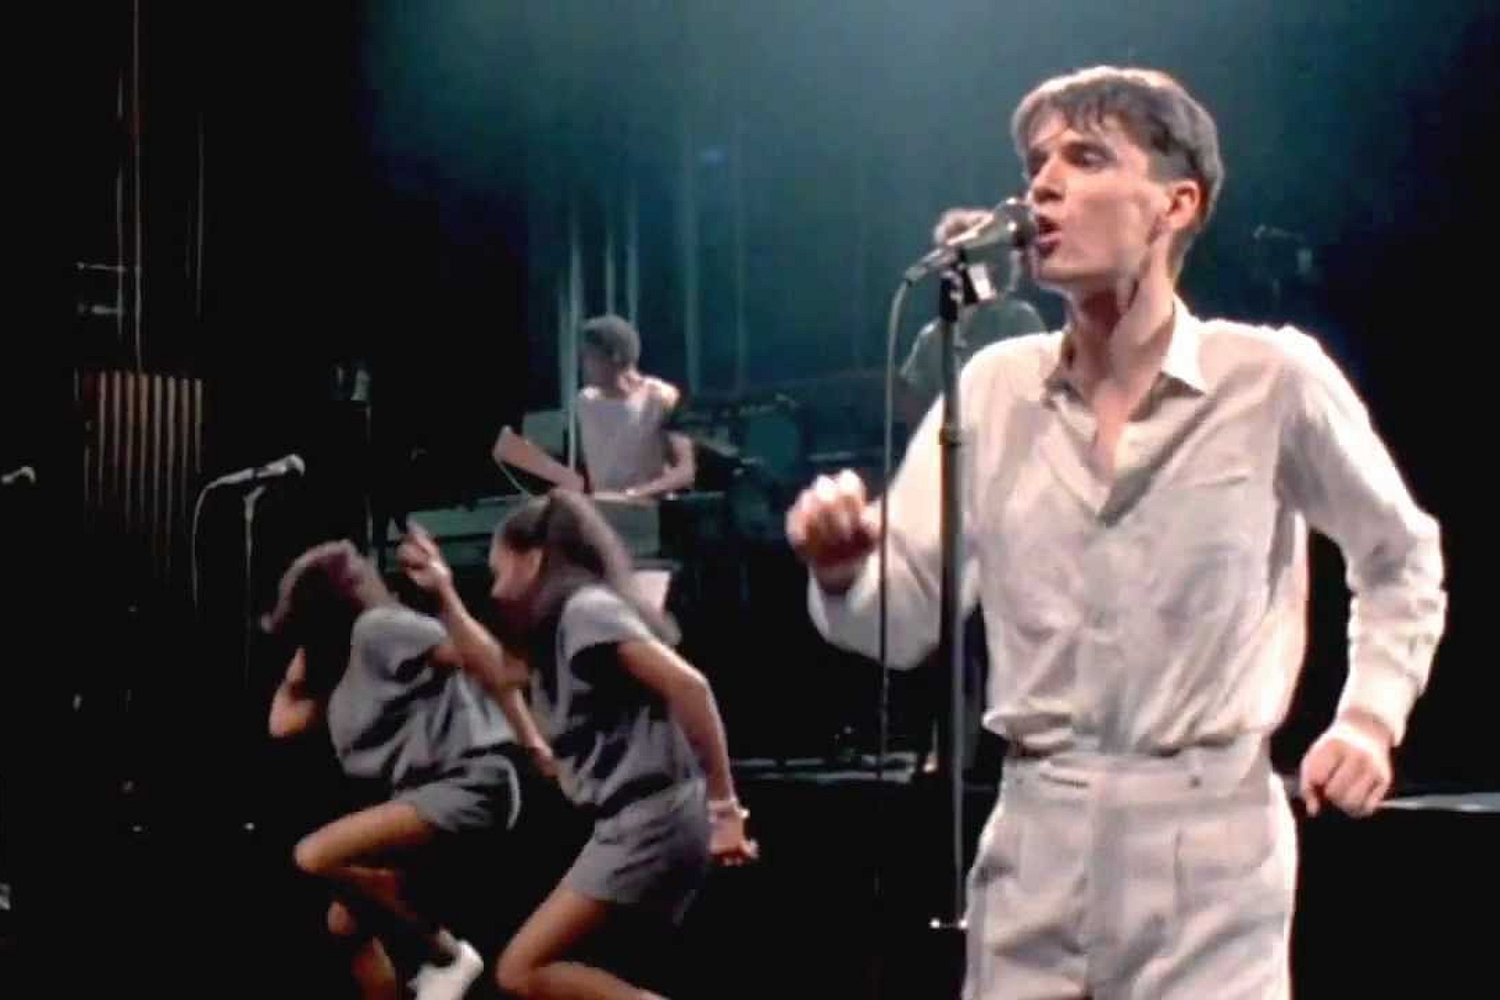 Watch a Talking Heads concert recorded in the ’80s